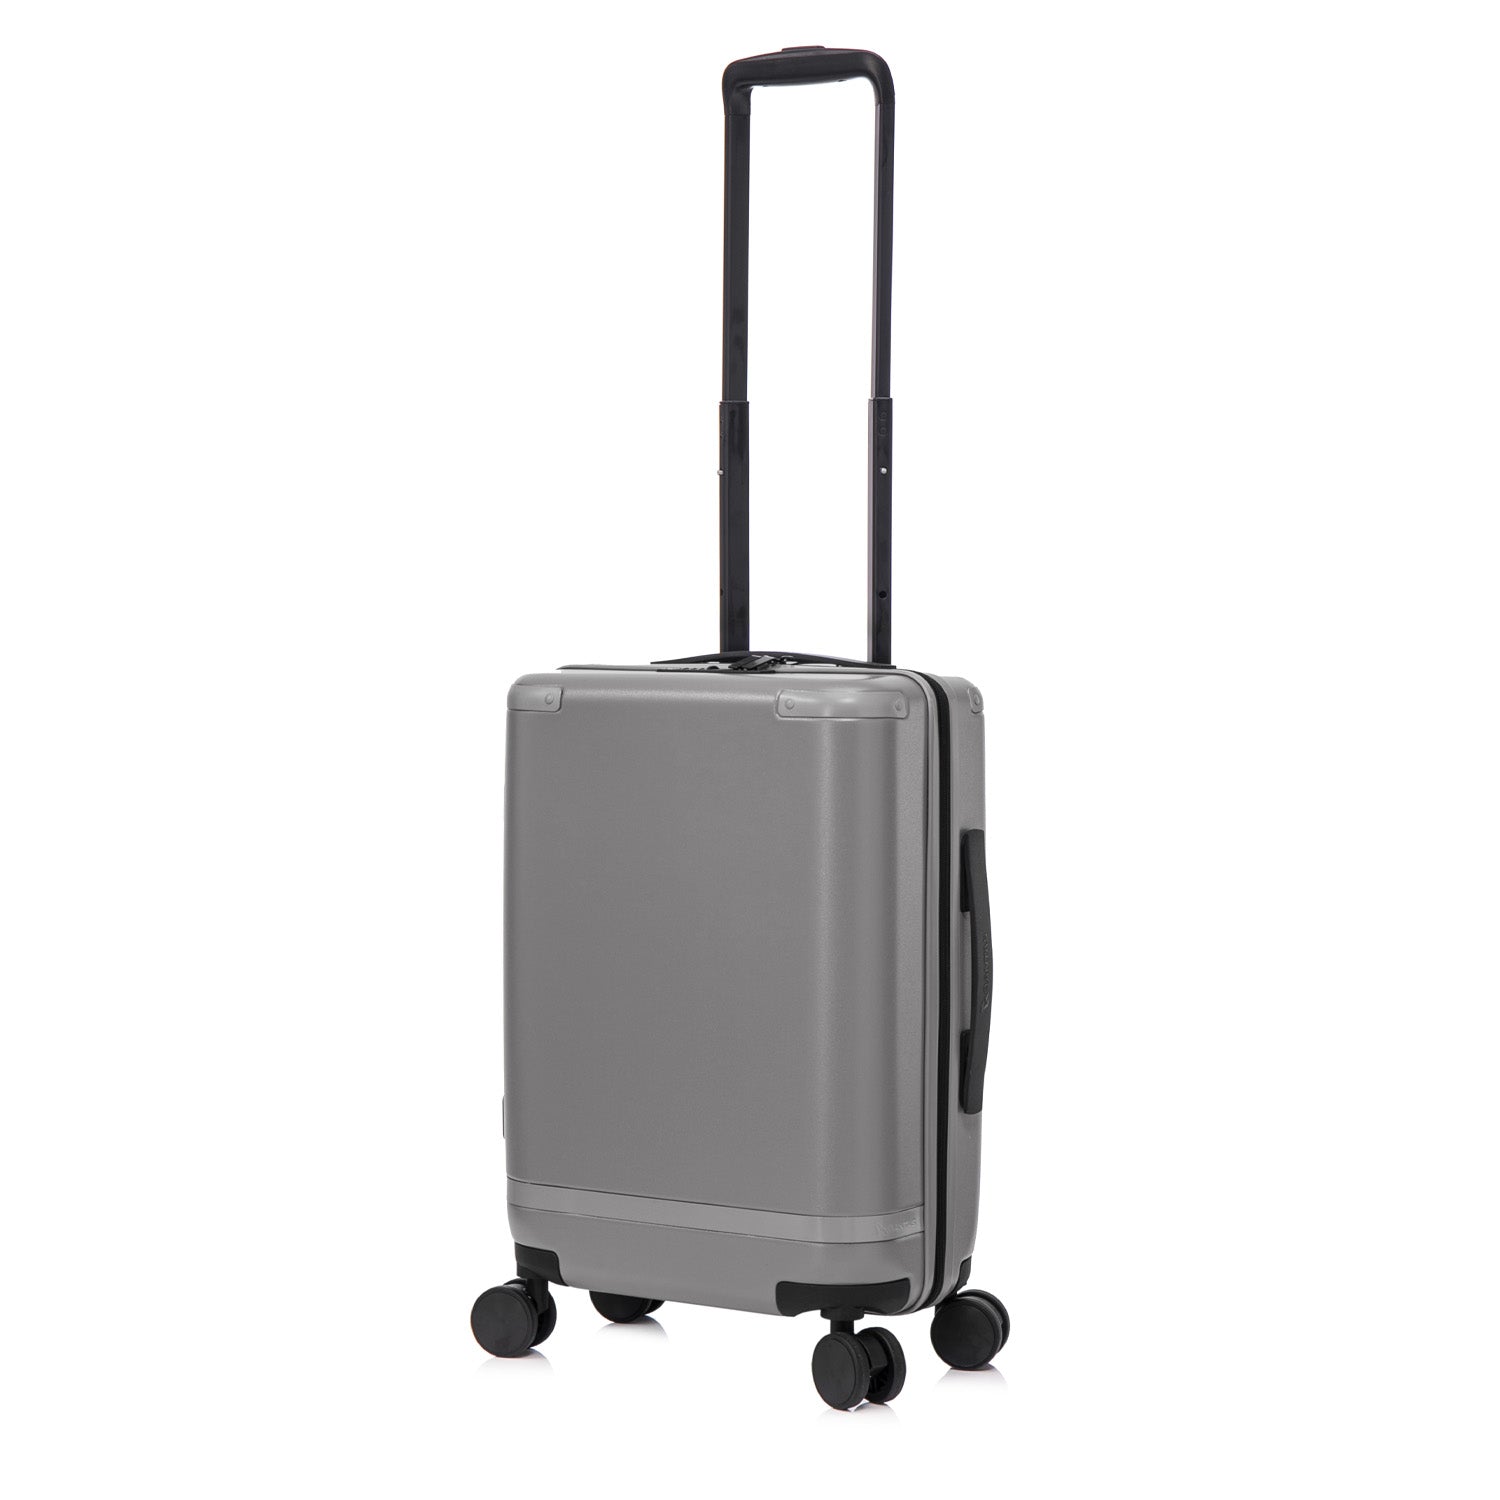 Qantas- QF250 ROME 56cm Small cabin spinner suitcase - Charcoal - 0